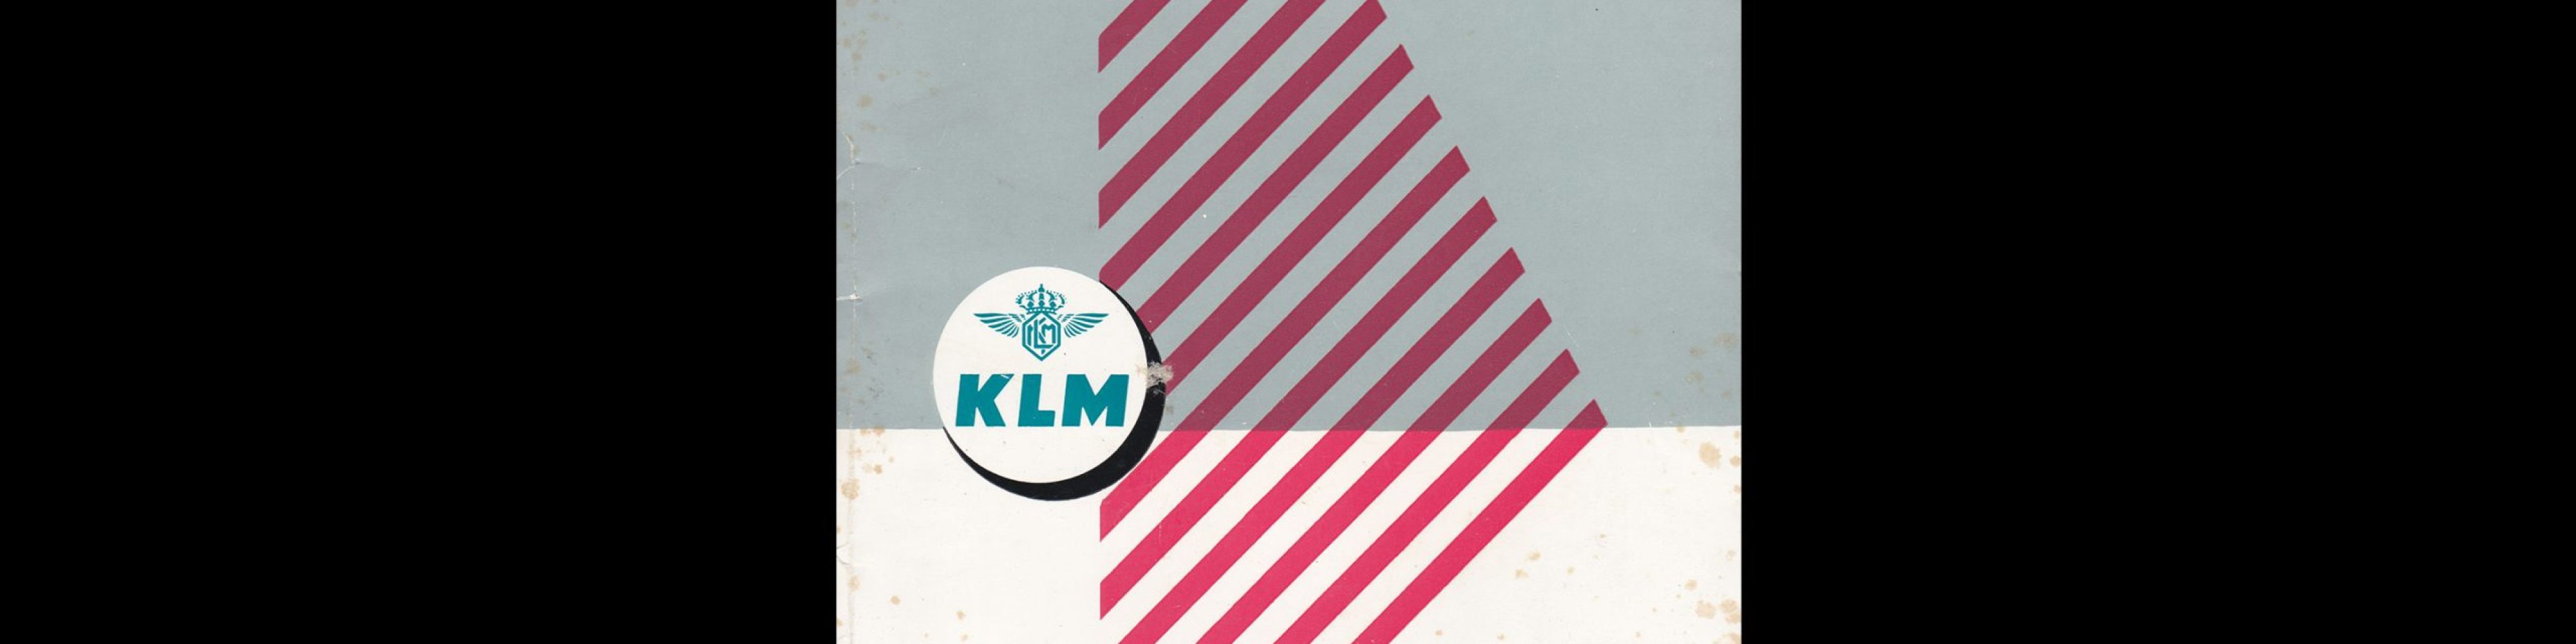 KLM Travel Documents Wallet, 1952. Designed by Otto Treumann